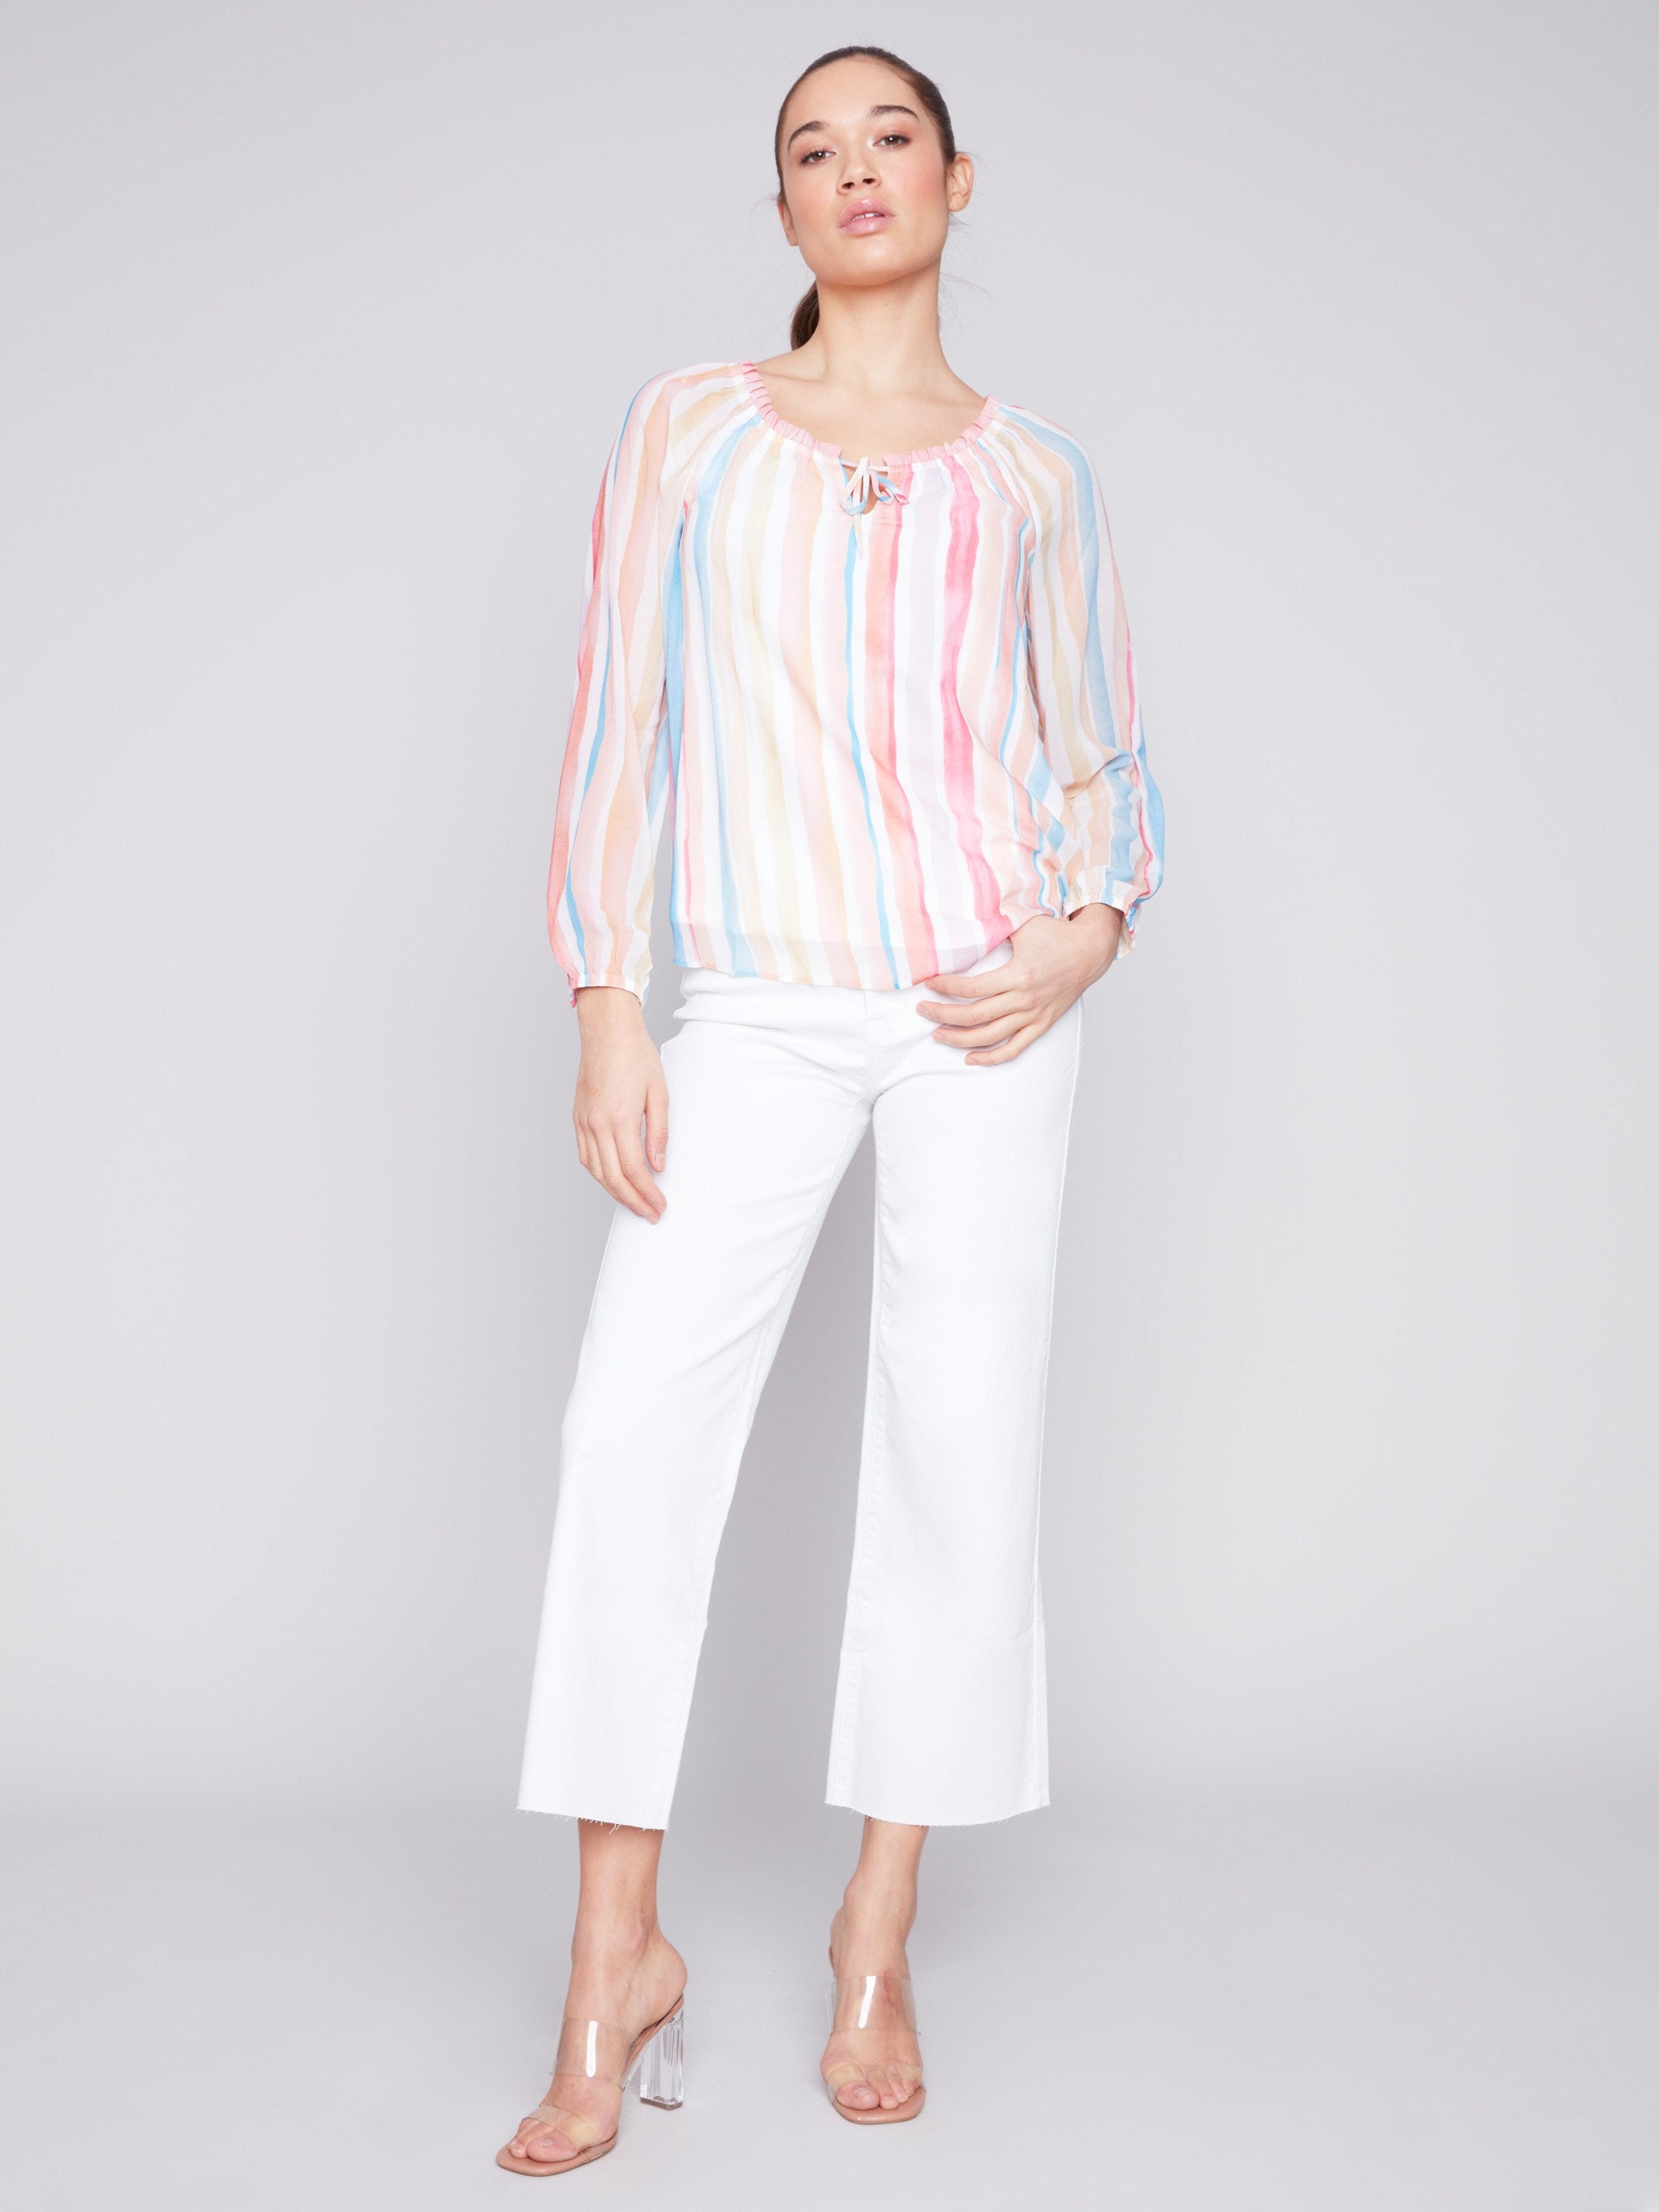 Printed Chiffon Blouse - Stripes - Charlie B Collection Canada - Image 3